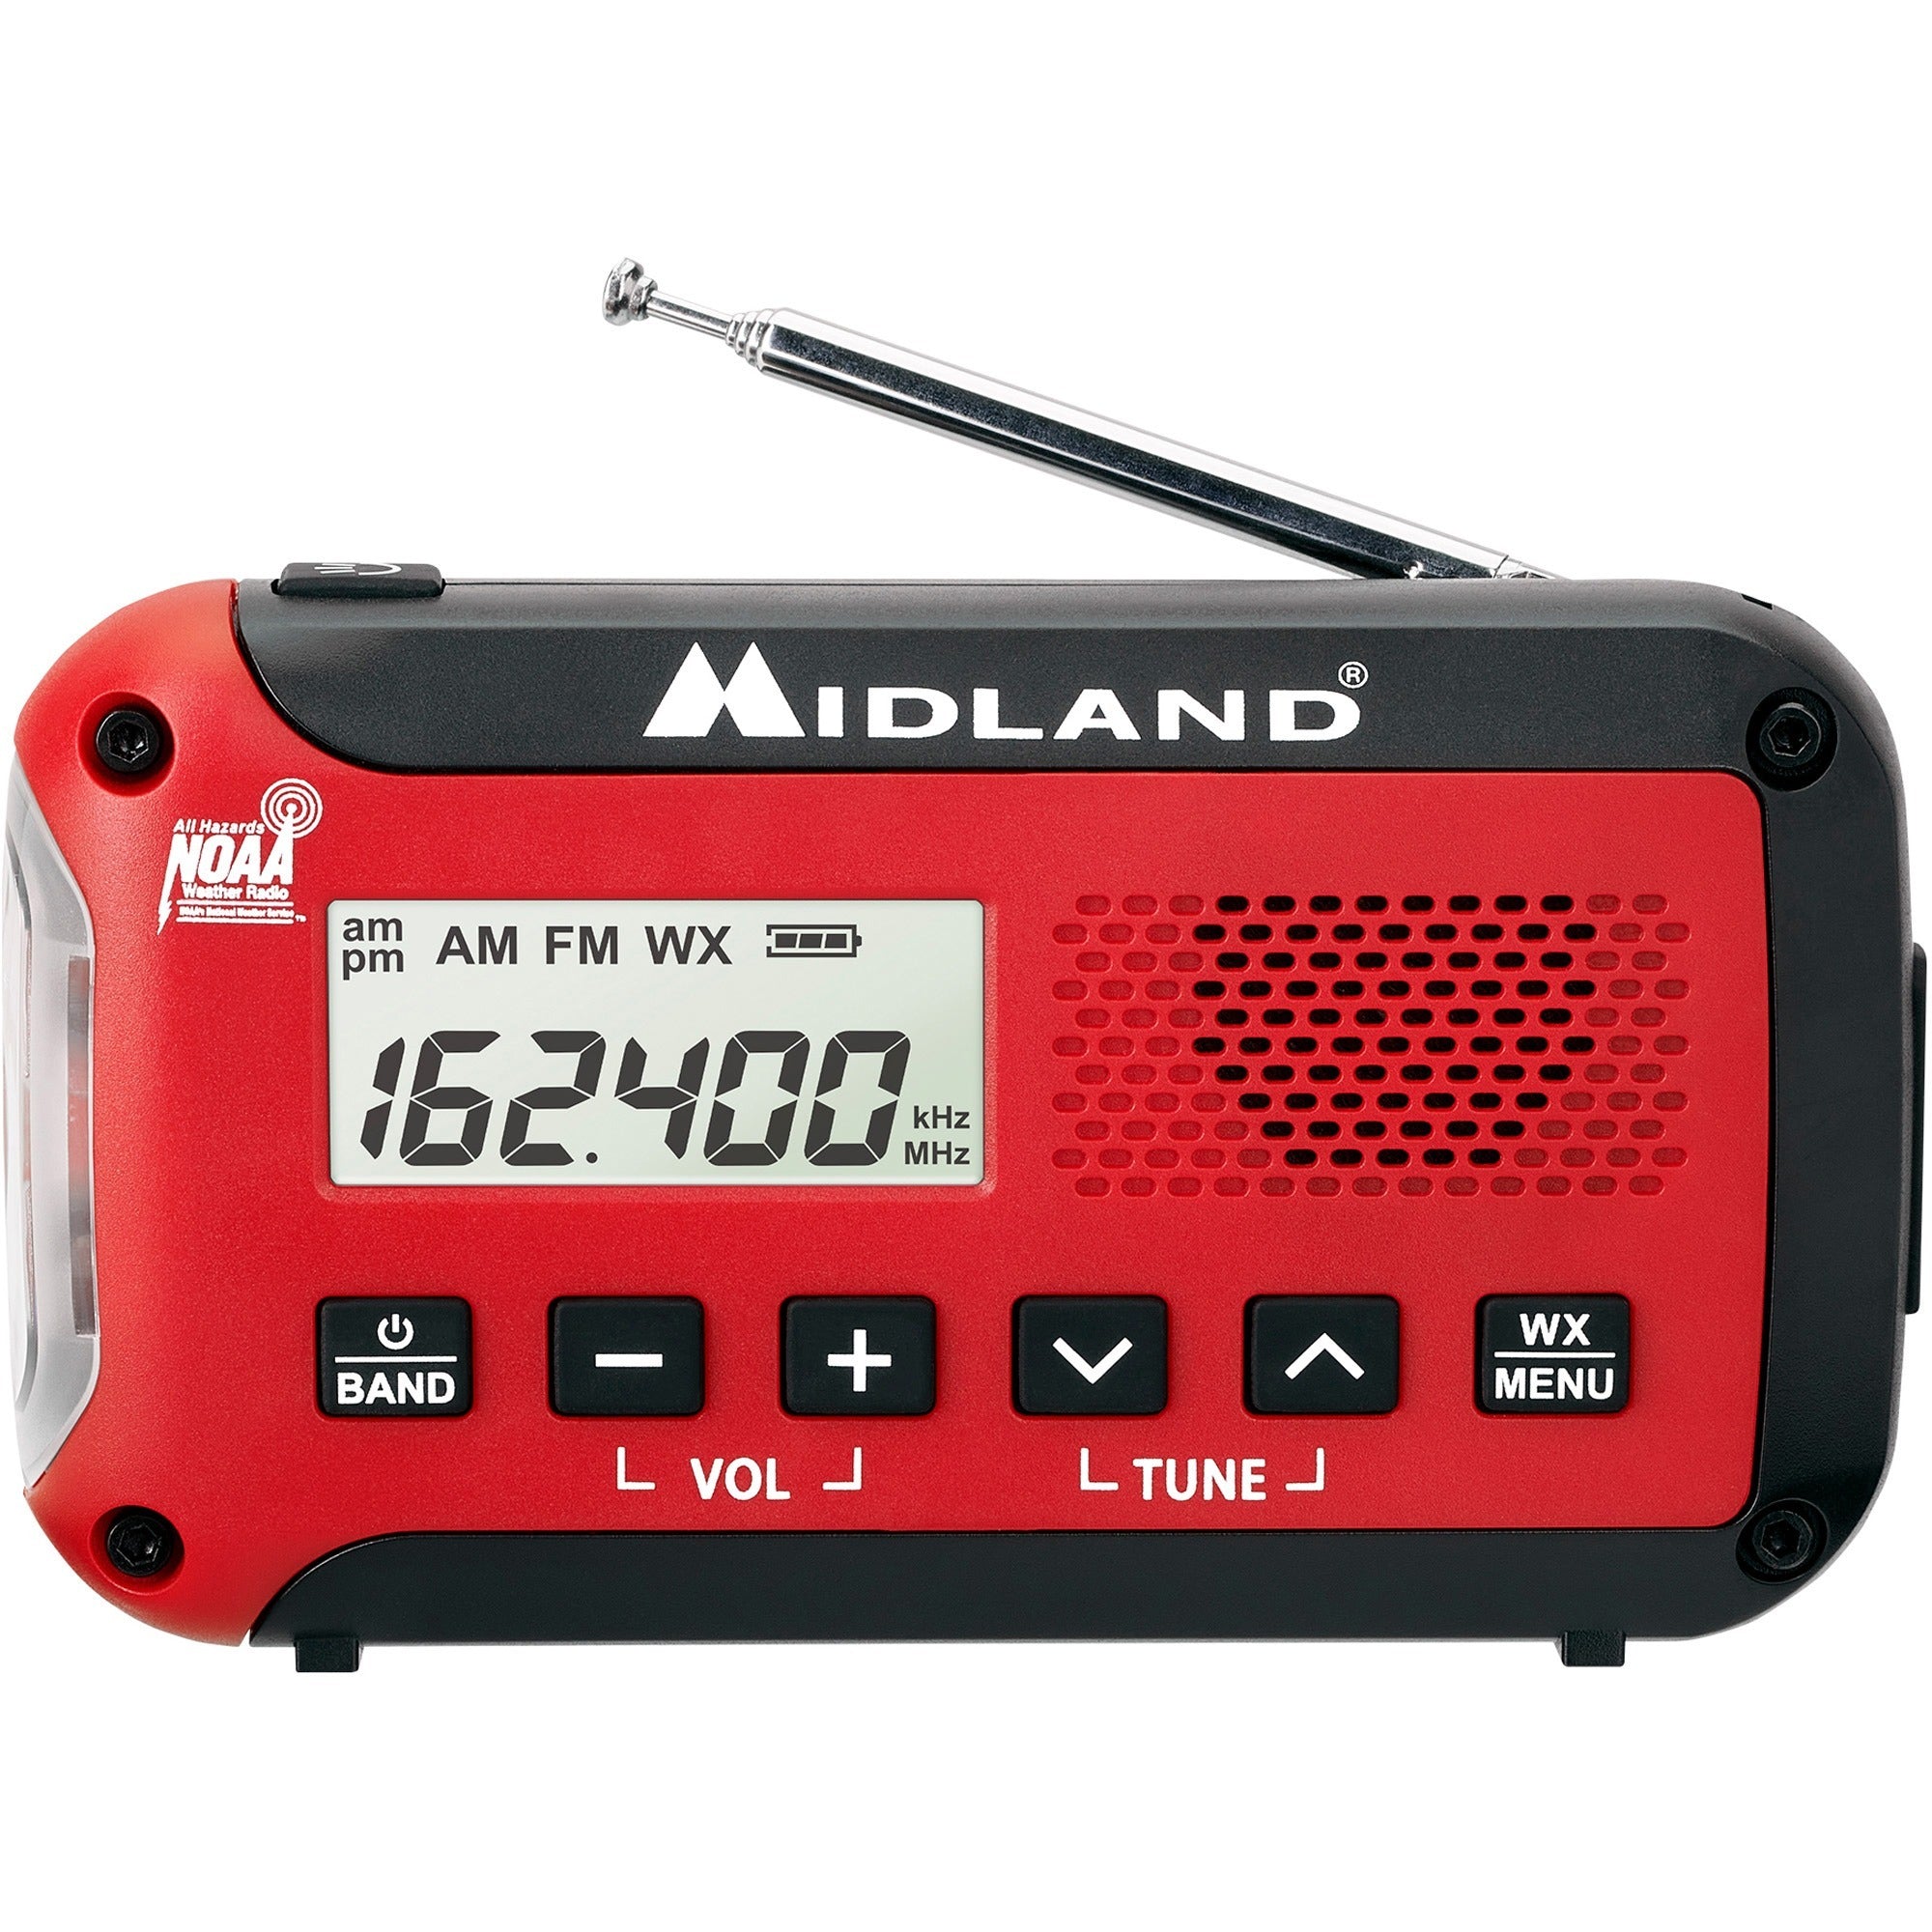 midland-e+ready-compact-emergency-alert-am-fm-weather-radio-for-hiking-weather-fishing-hunting-camping-overlanding-with-noaa-all-hazard-am-fm-portable_mroer10vp - 2